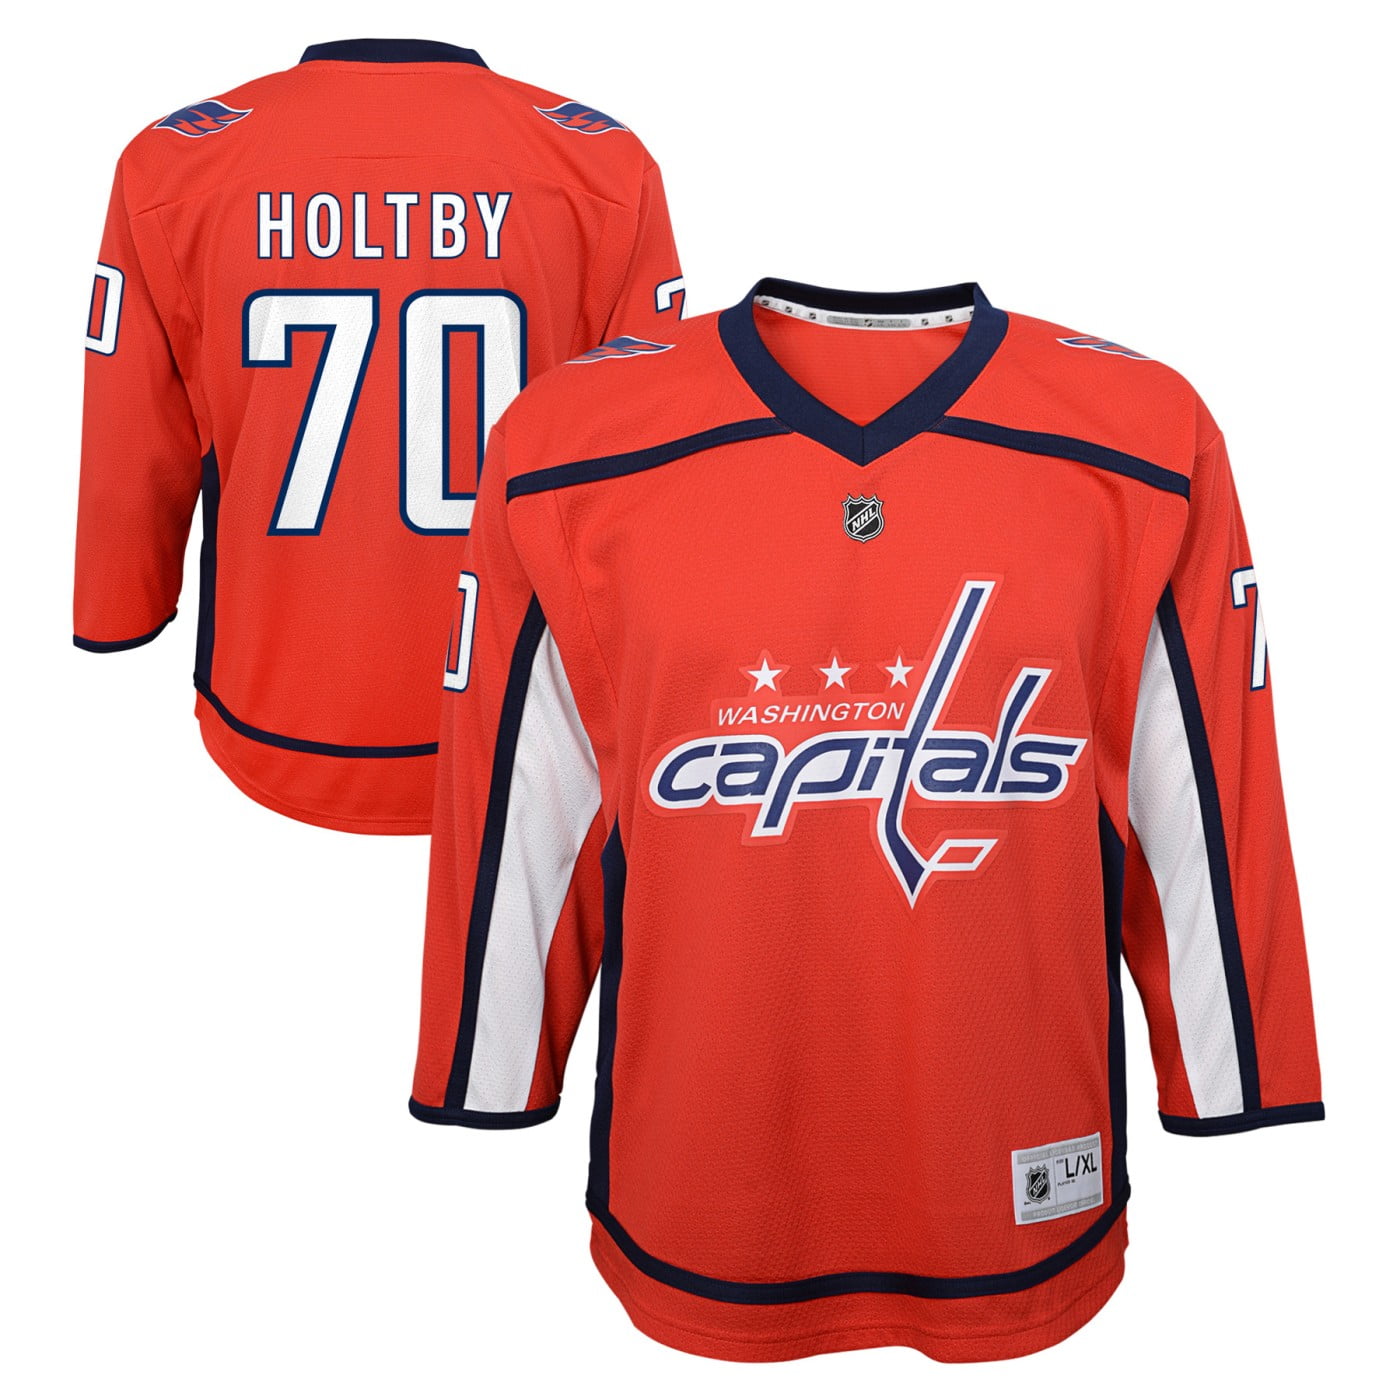 holtby jersey youth